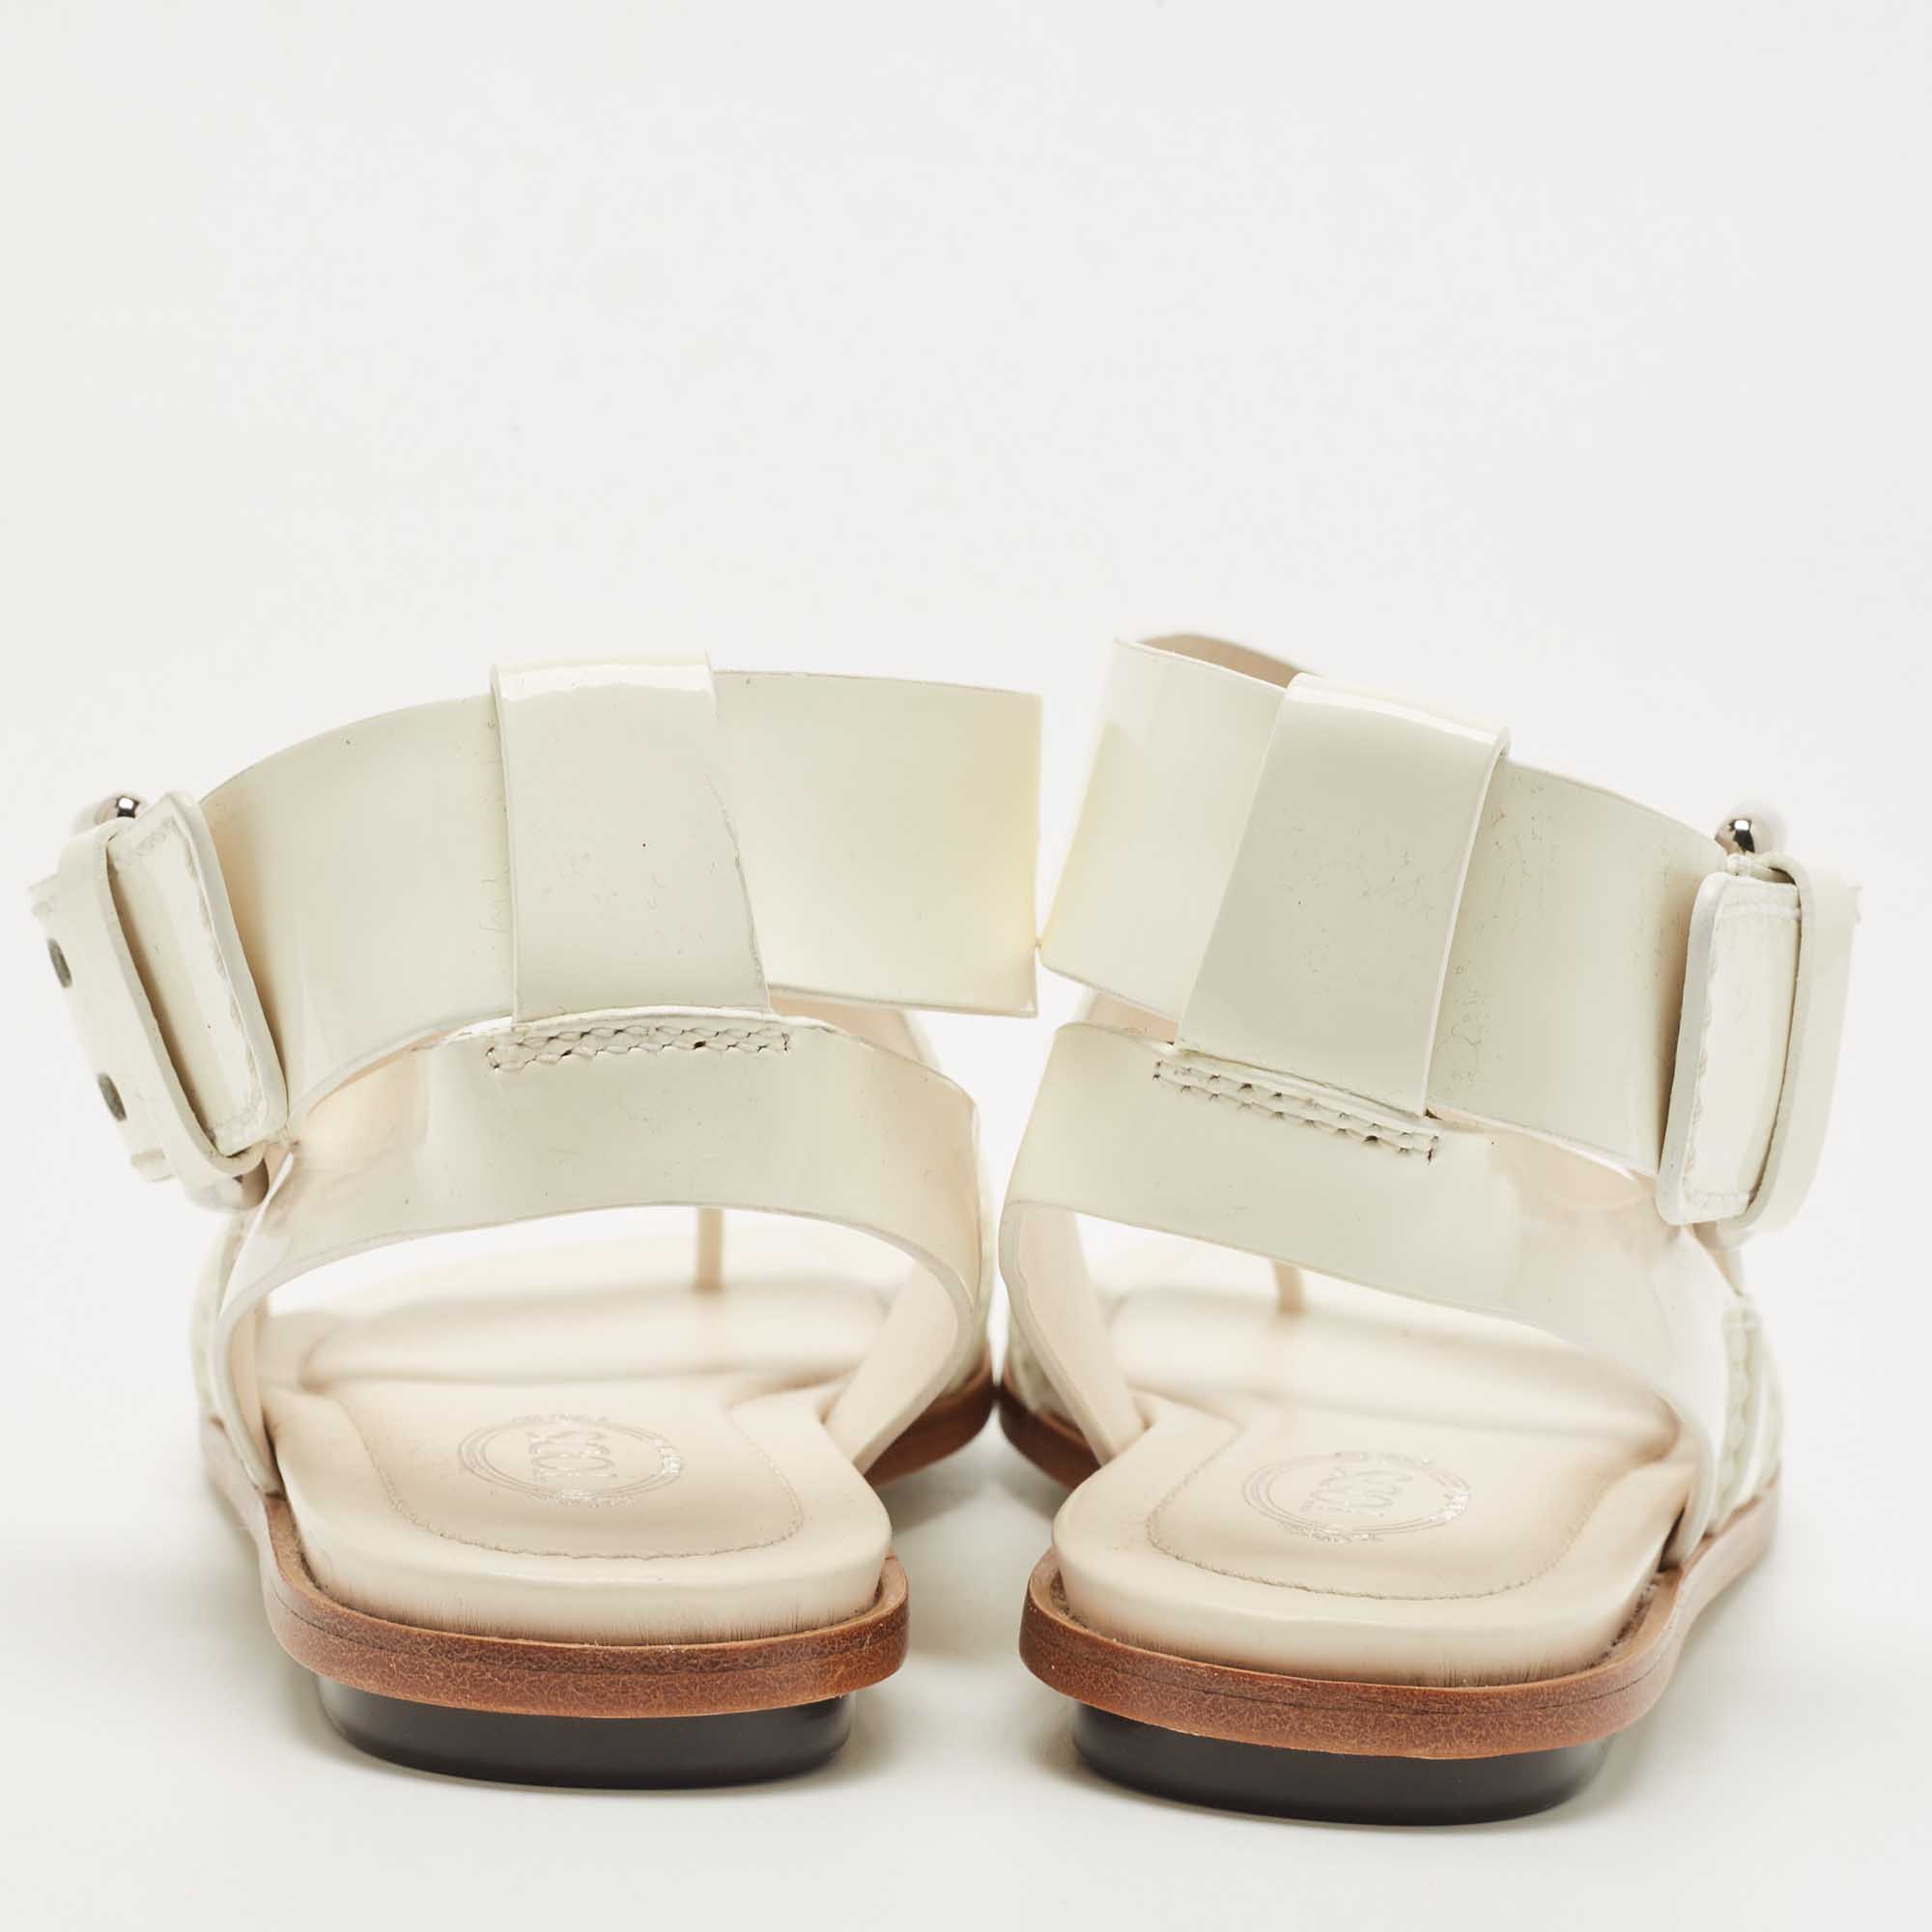 Tod's  Cream Patent Leather Cross Strap Flat Sandals Size 36.5